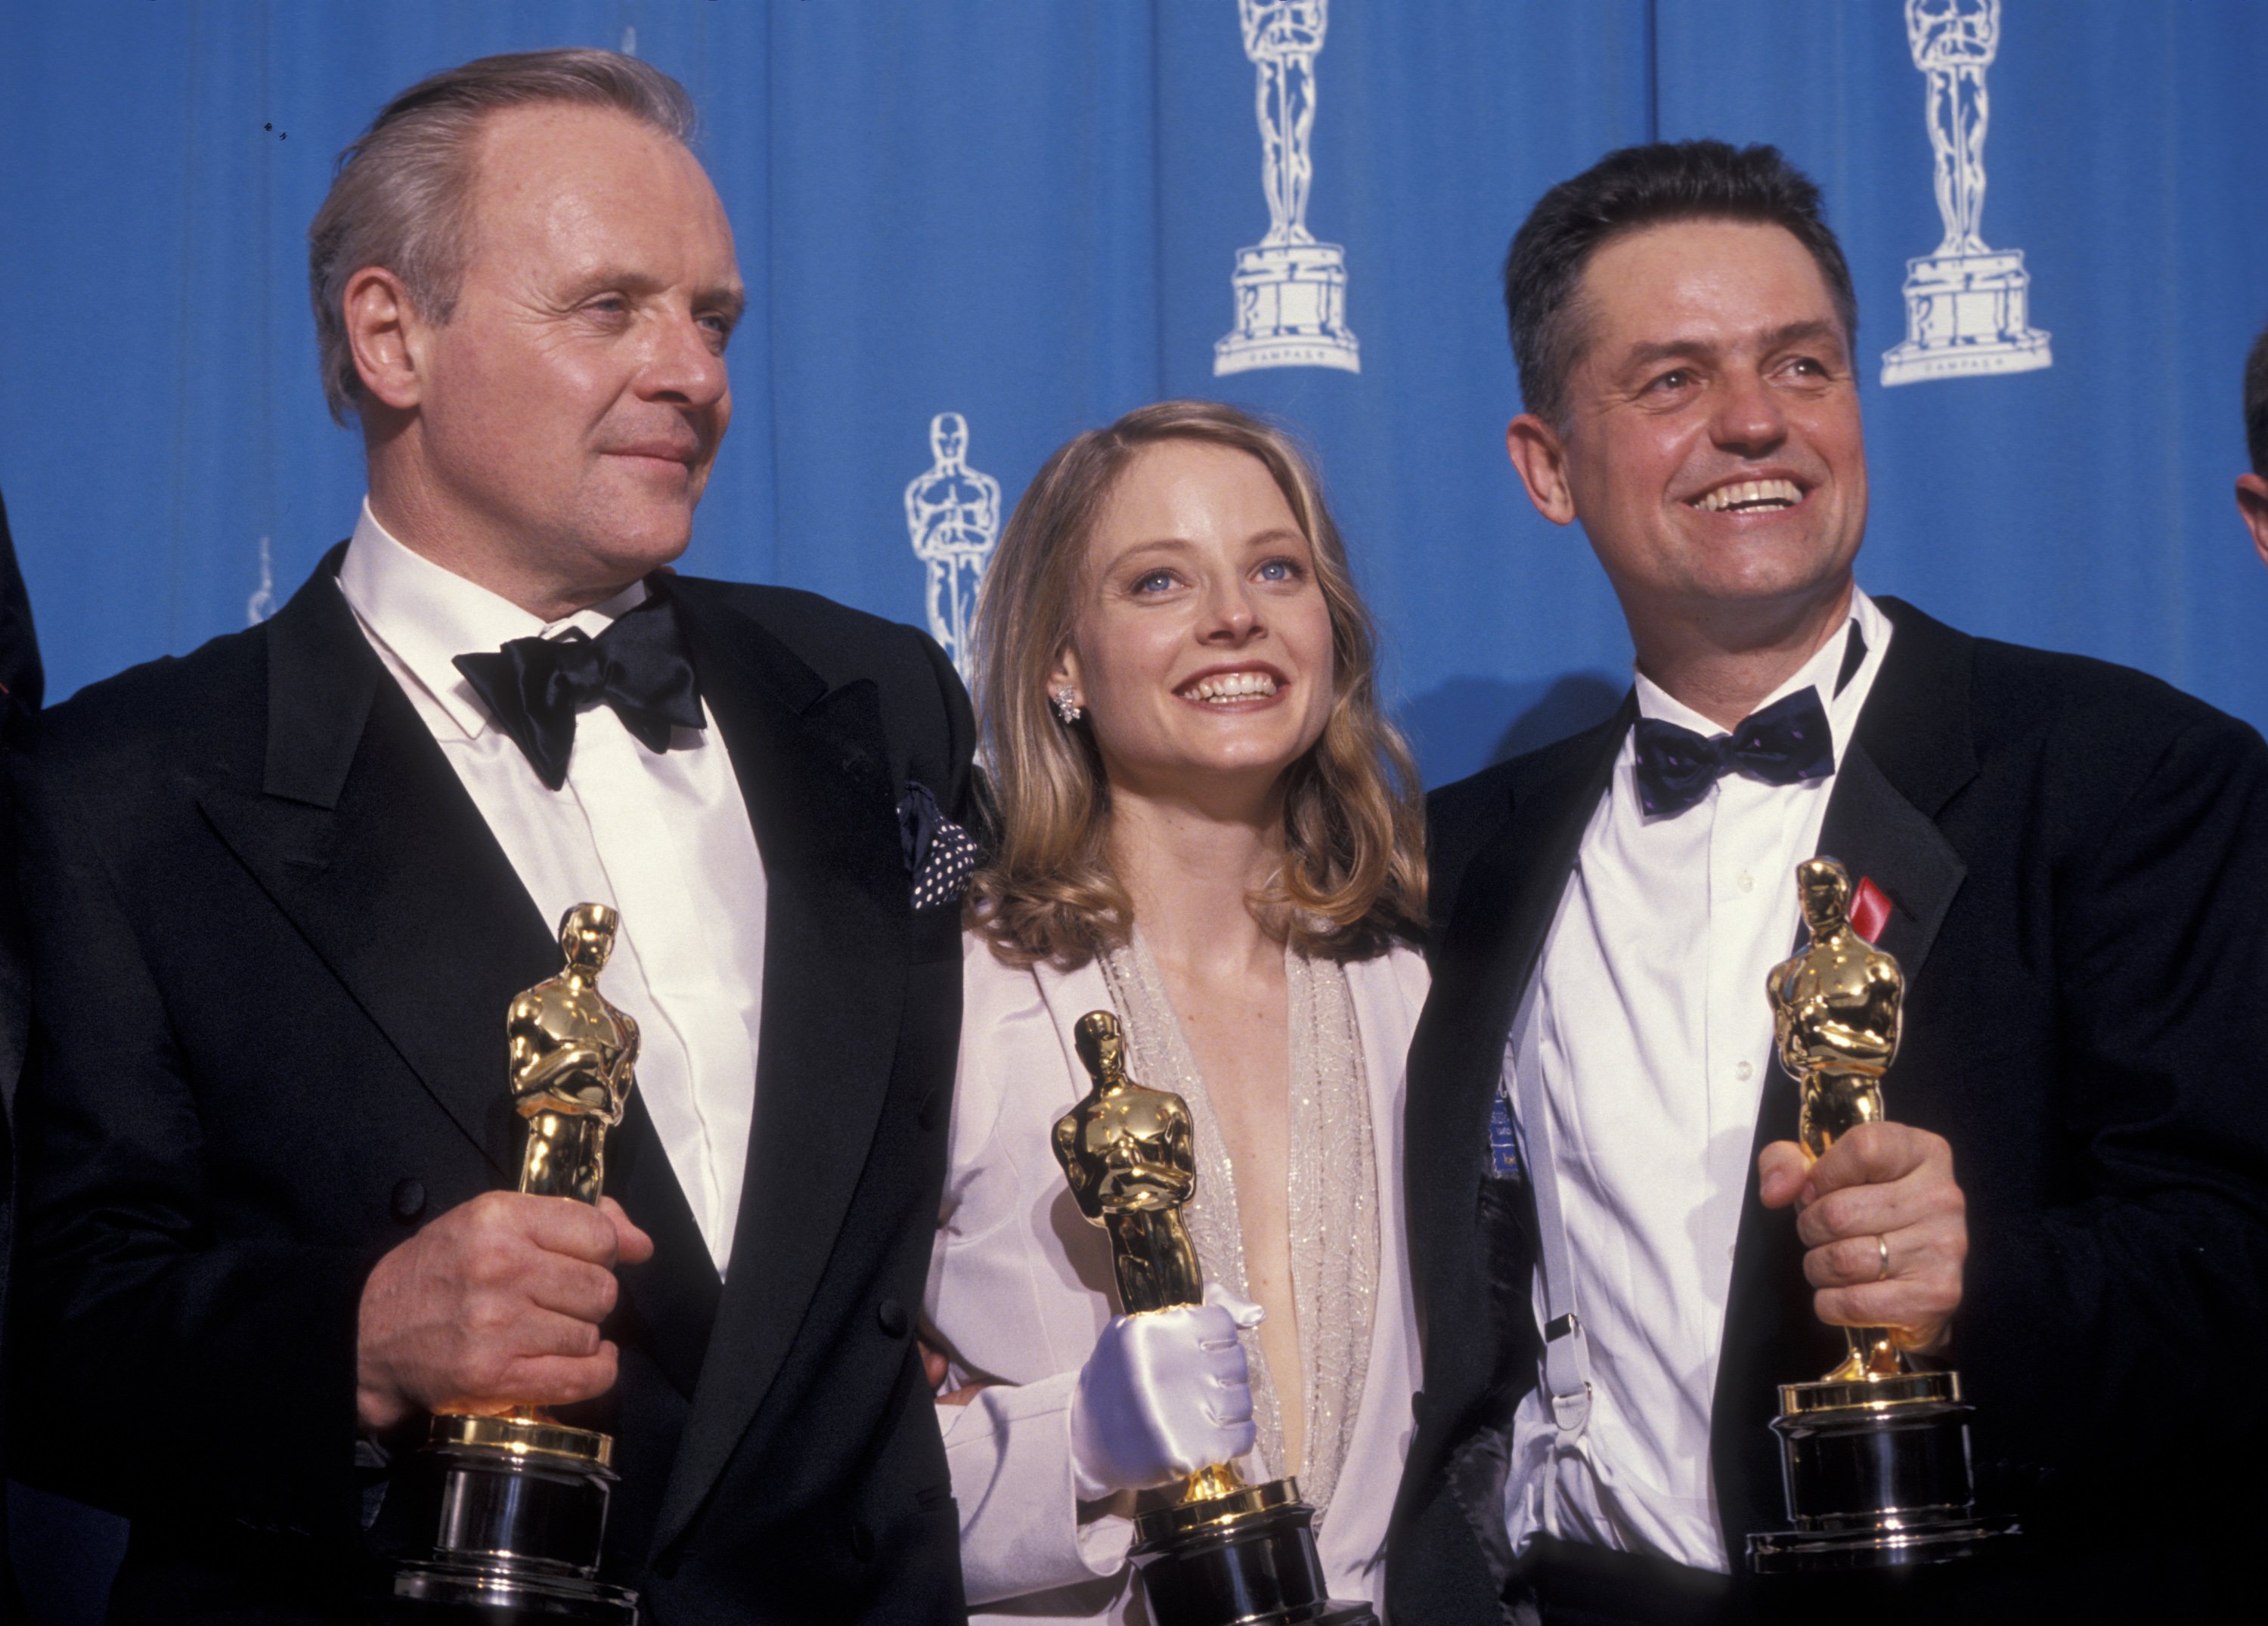 Anthony Hopkins, Jodie Foster, and Jonathan Demme at the 64th Annual Academy Awards in 1992, in Hollywood. | Source: Getty Images